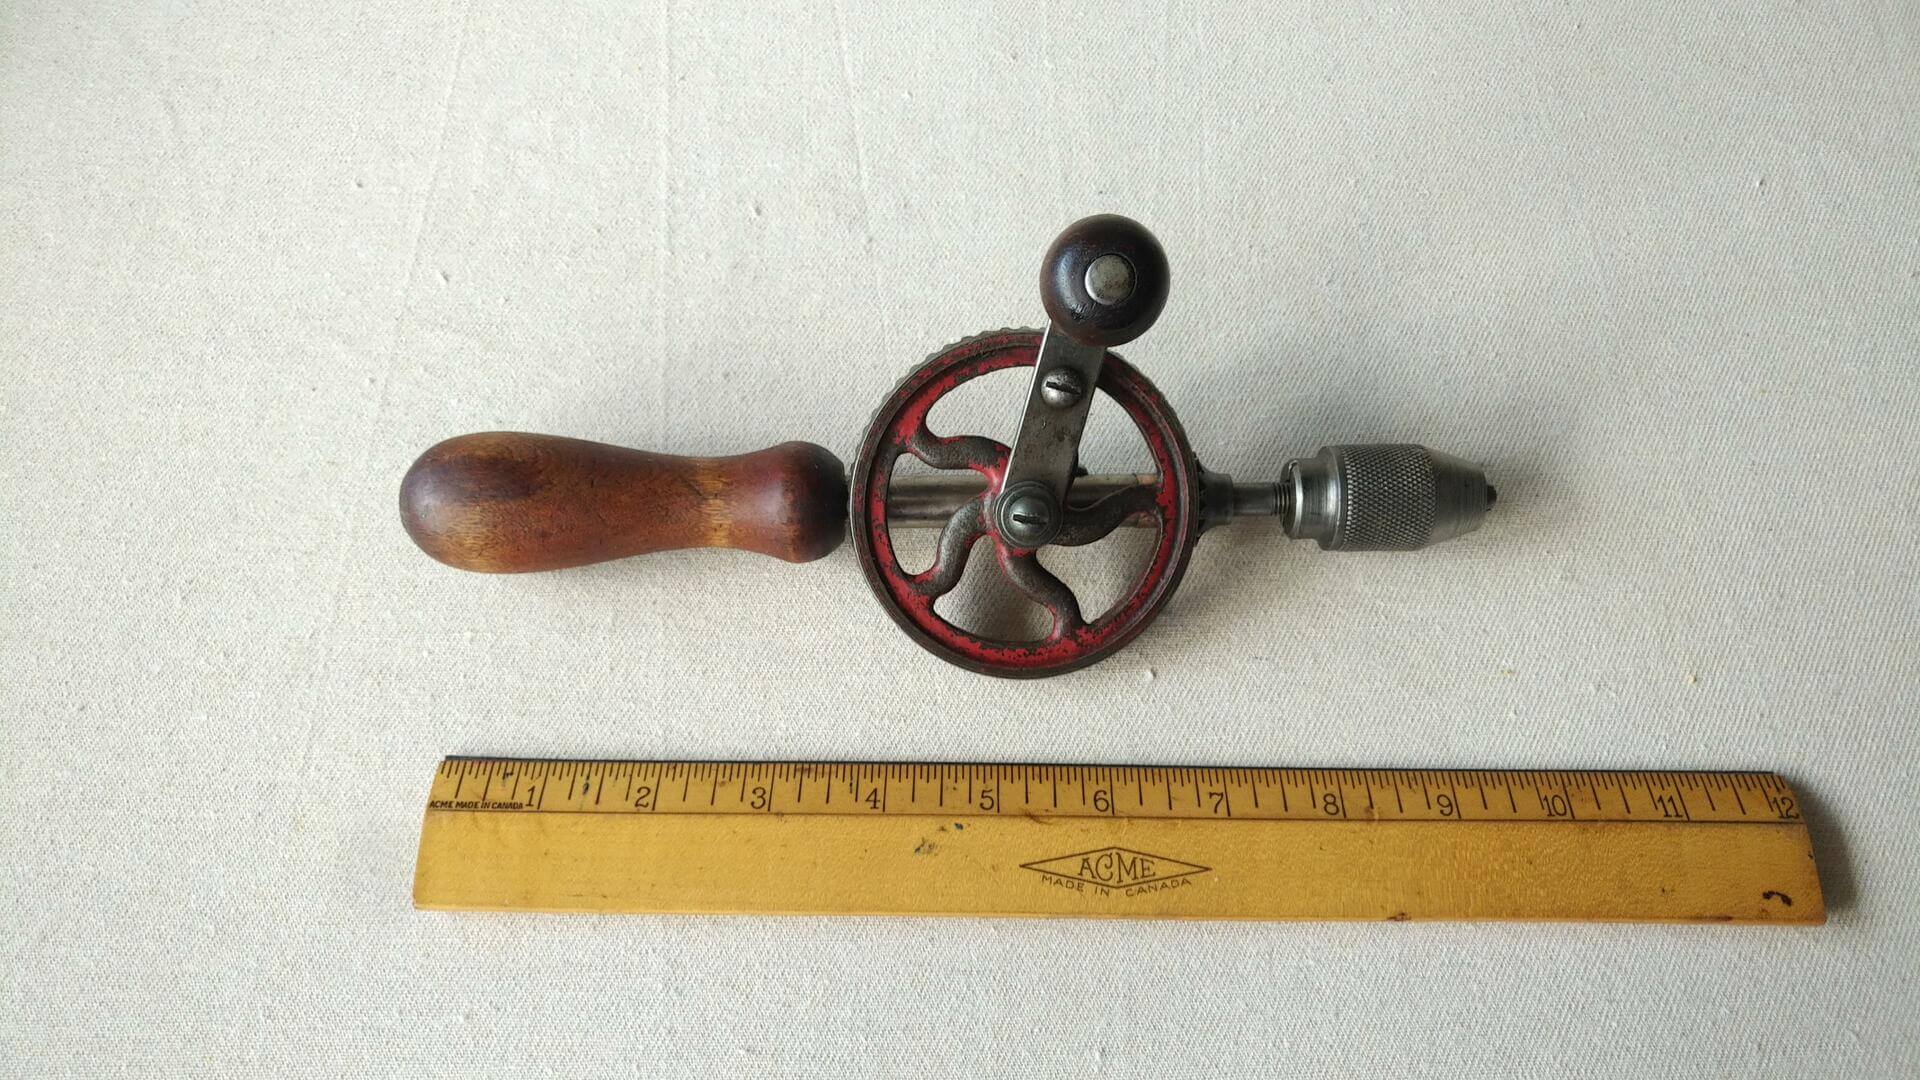 Vintage egg beater style manual woodworking push drill with the beautiful wooden handle 10 inches long. Antique collectible carpentry hand tools